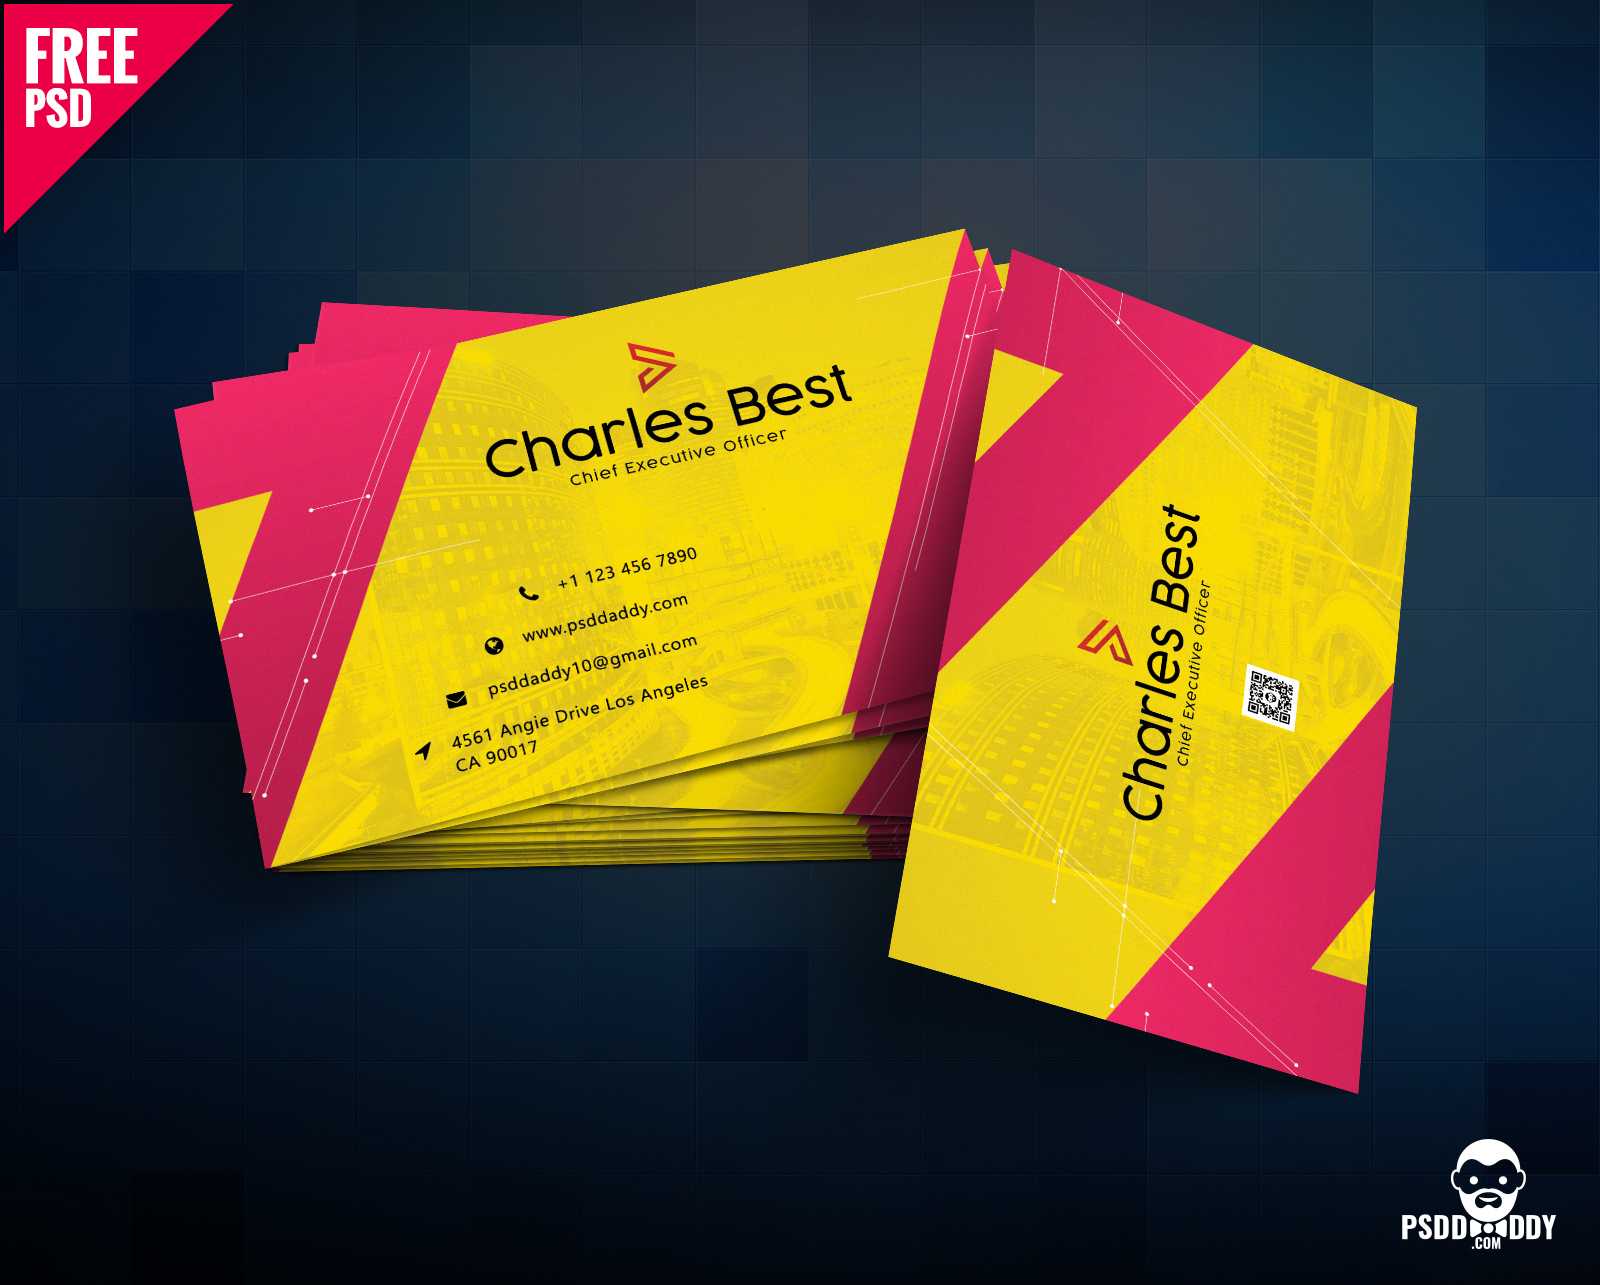 Download] Creative Business Card Free Psd | Psddaddy With Download Visiting Card Templates